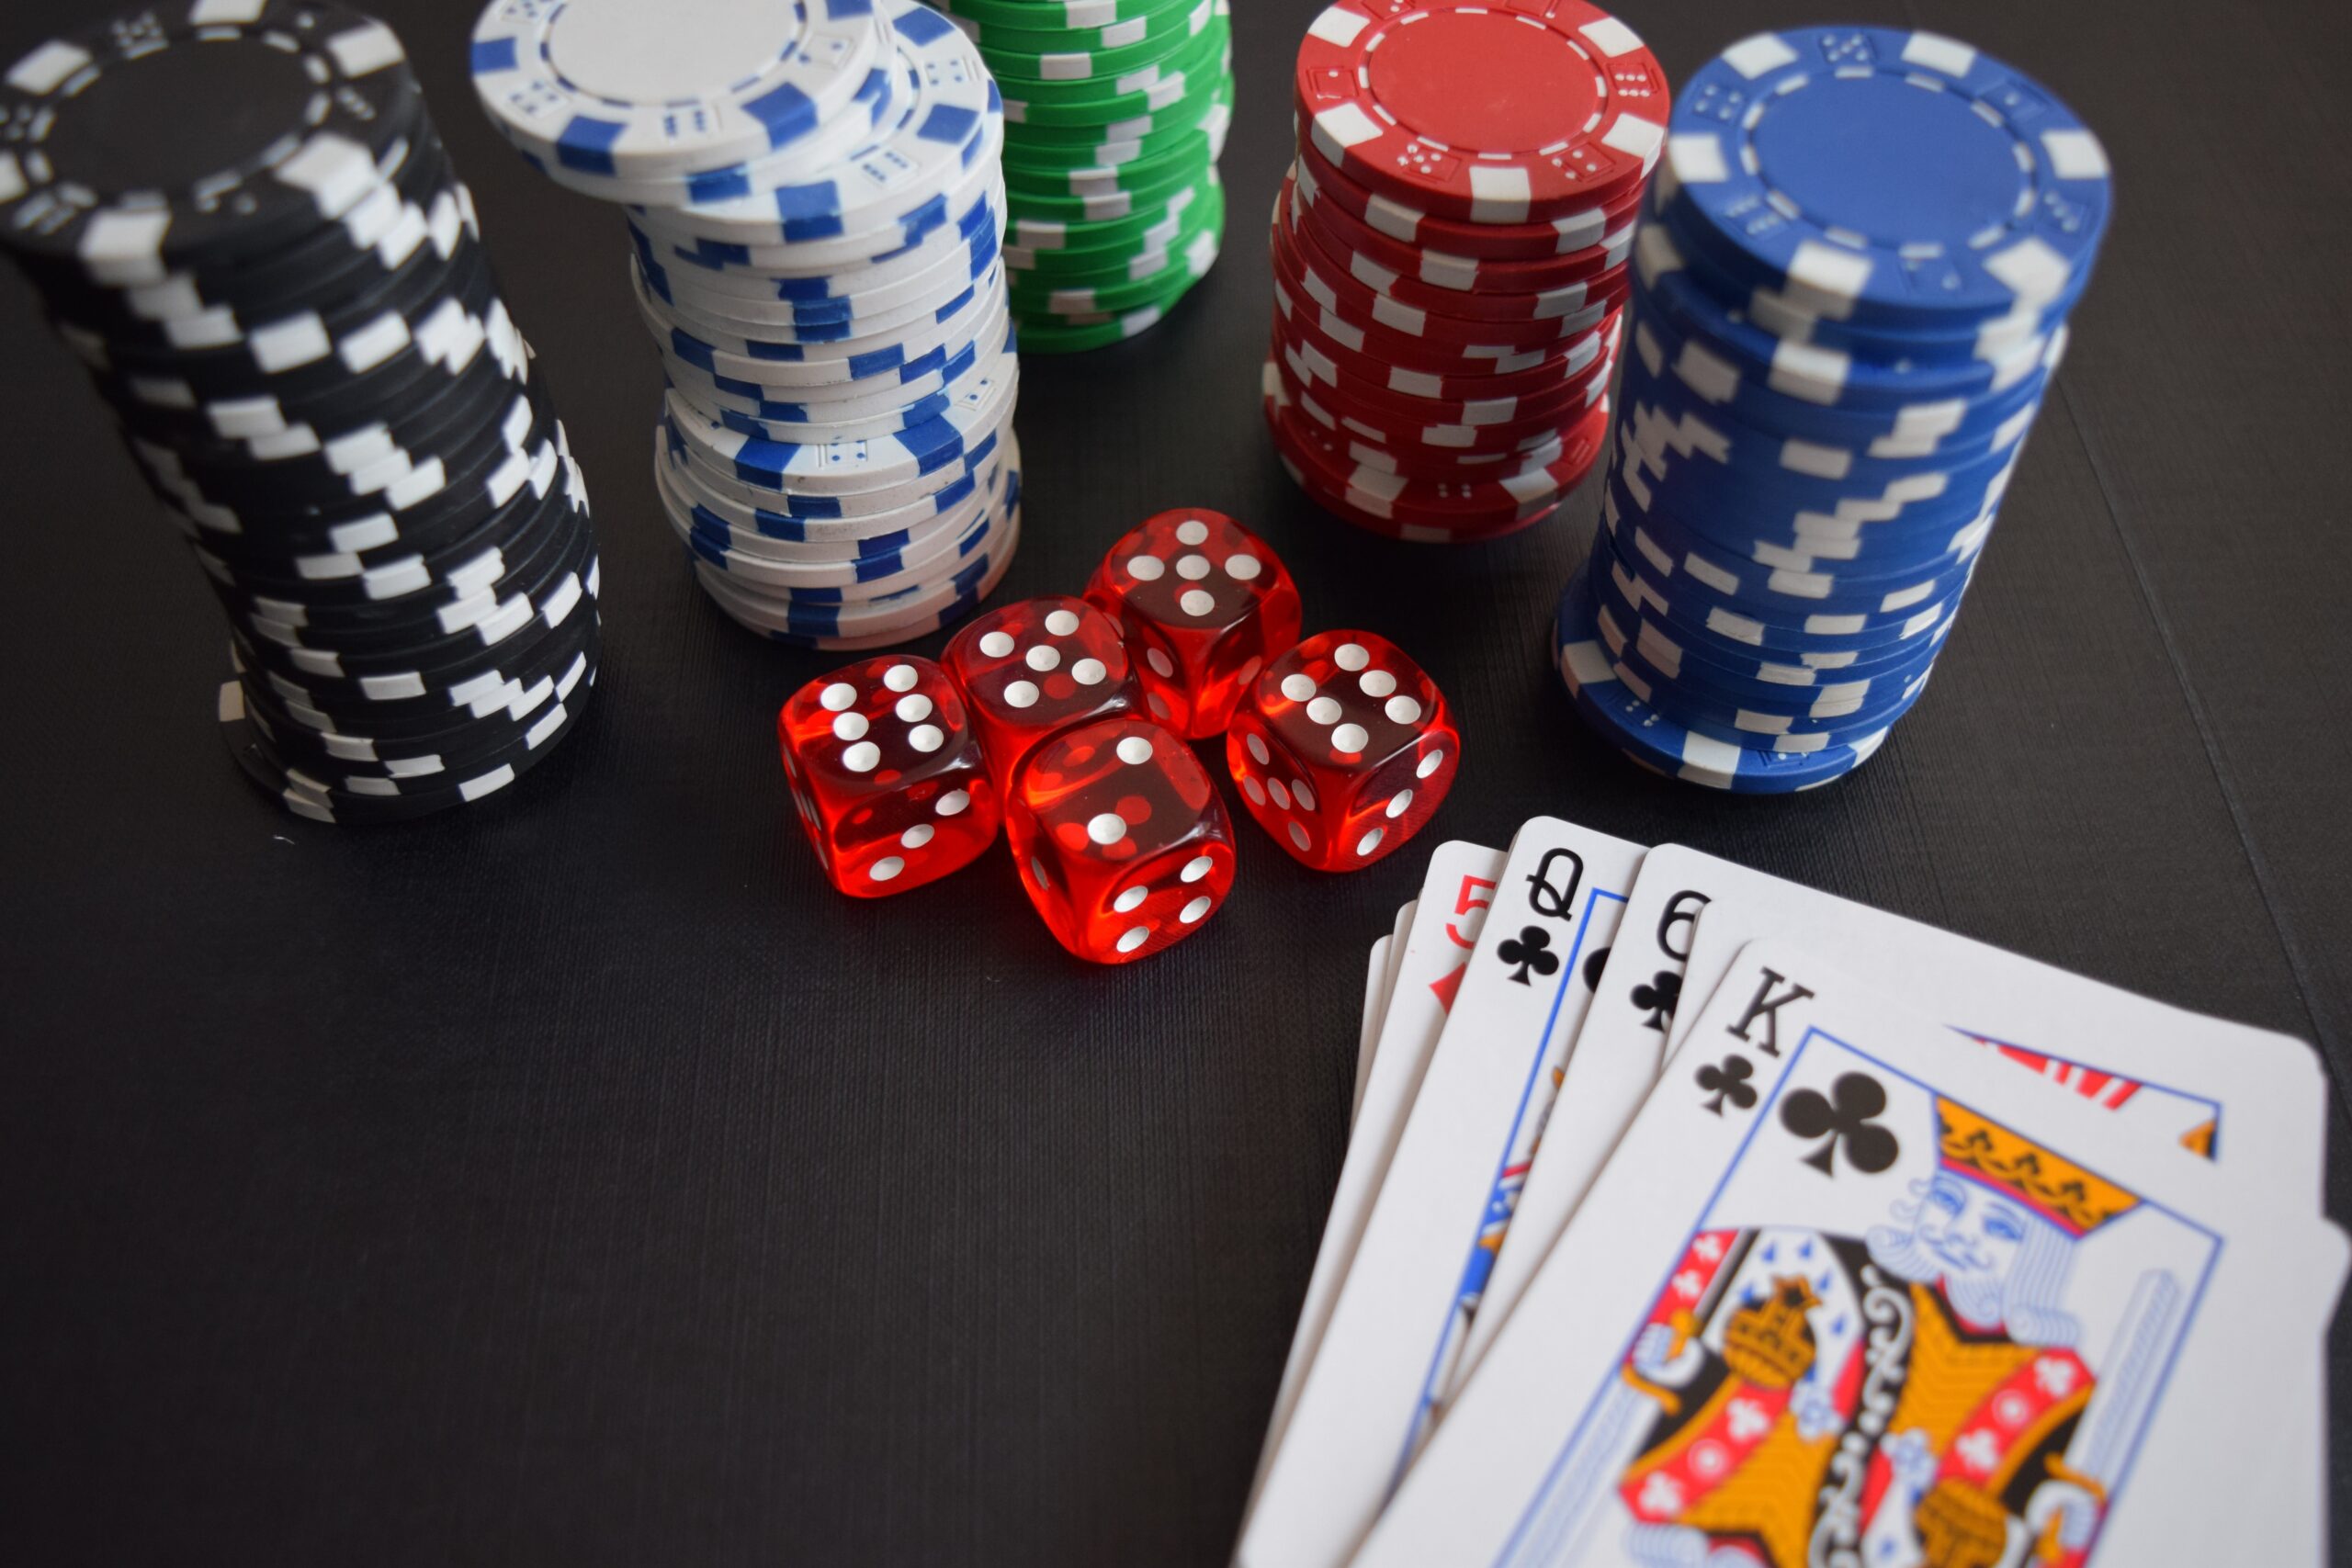 Is It Safe To Use Or Download Online Casinos?